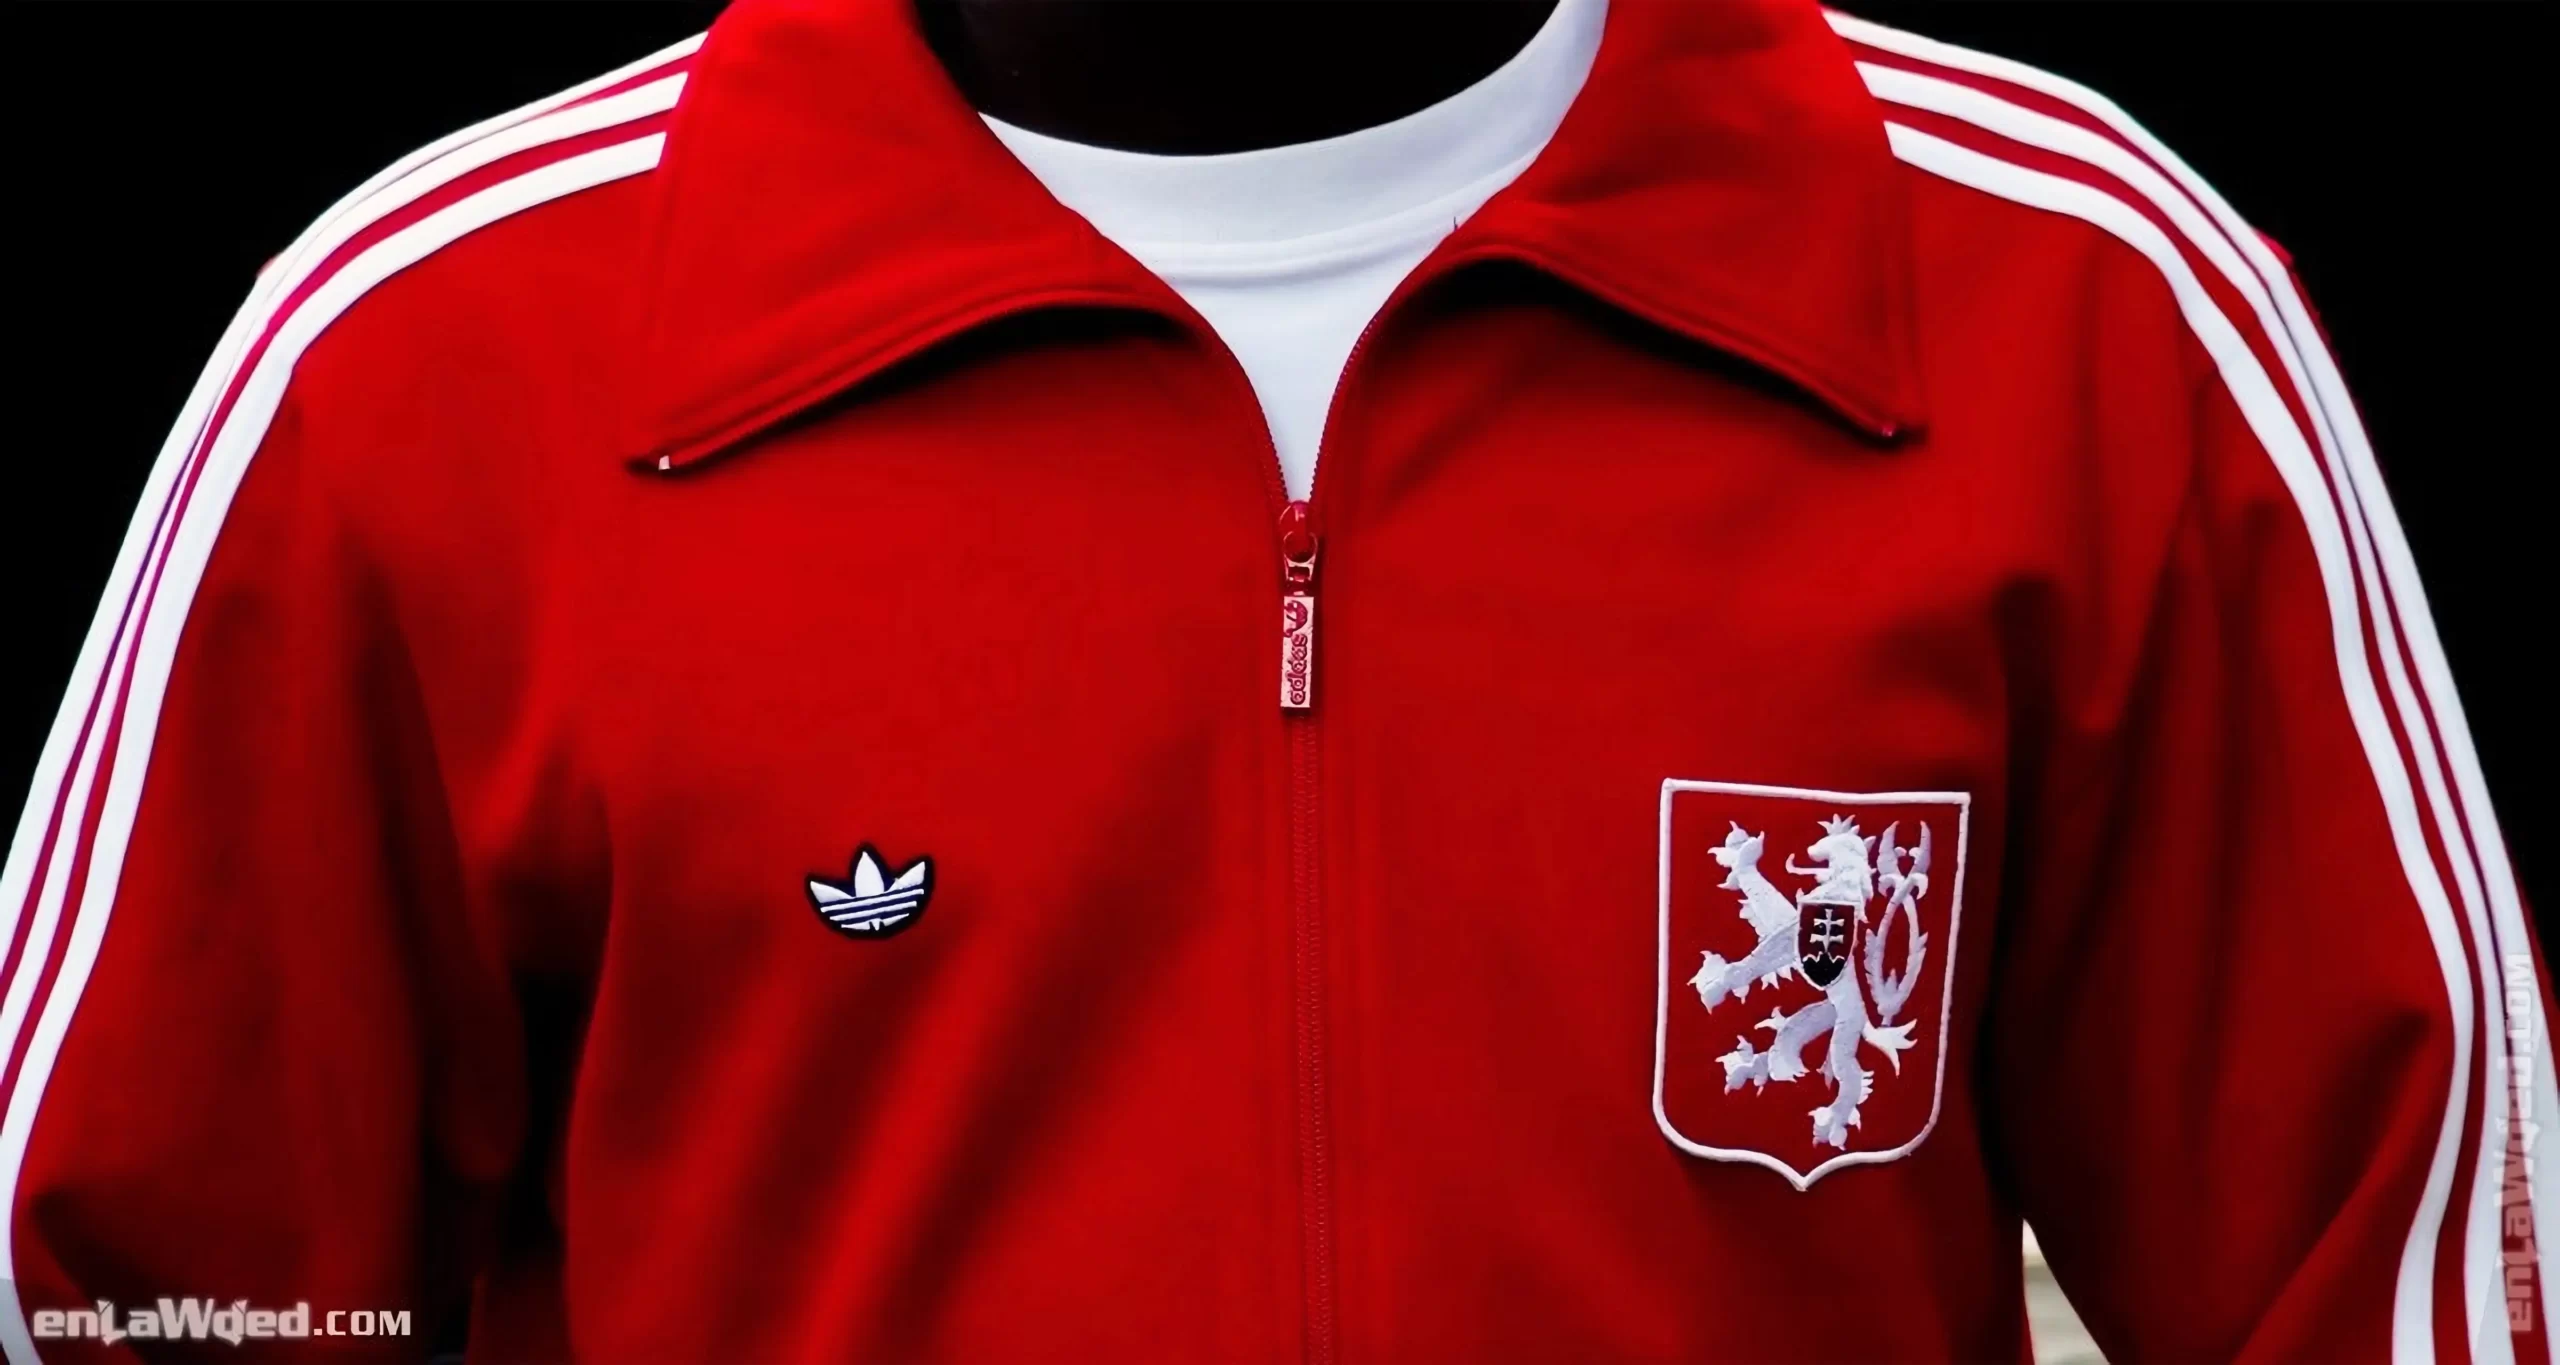 Men’s 2007 Slovakia Love Track Top by Adidas Originals: Uncovered (EnLawded.com file #lmcgfzpc2glmfj9k6cn)